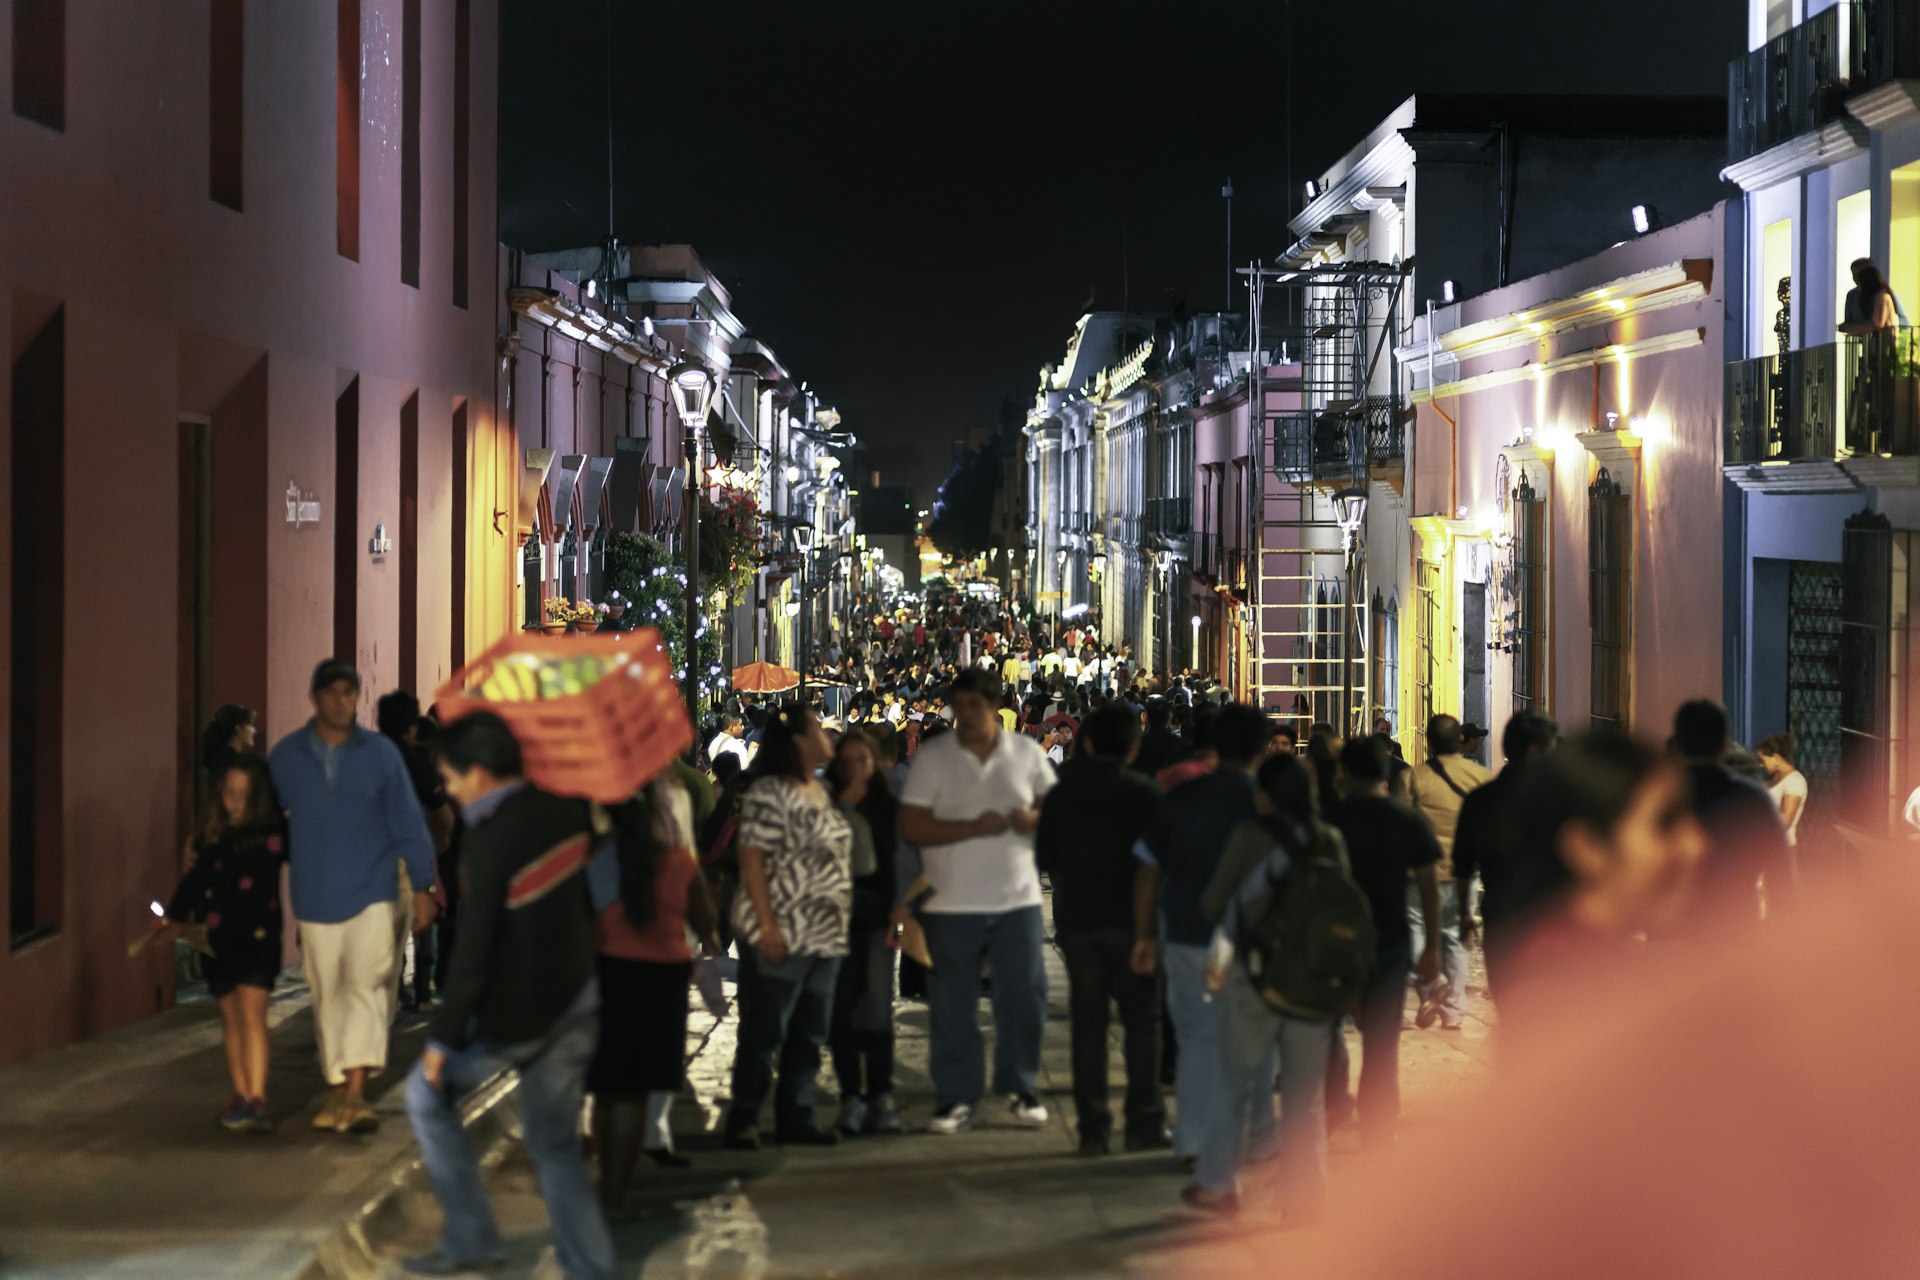 We see a crowded night street in downtown Oaxaca City in Mexico, during the celebration time and annual Guelaguetza celebration. the street is very crowded; the focus is in the background; the front people are in soft focus.